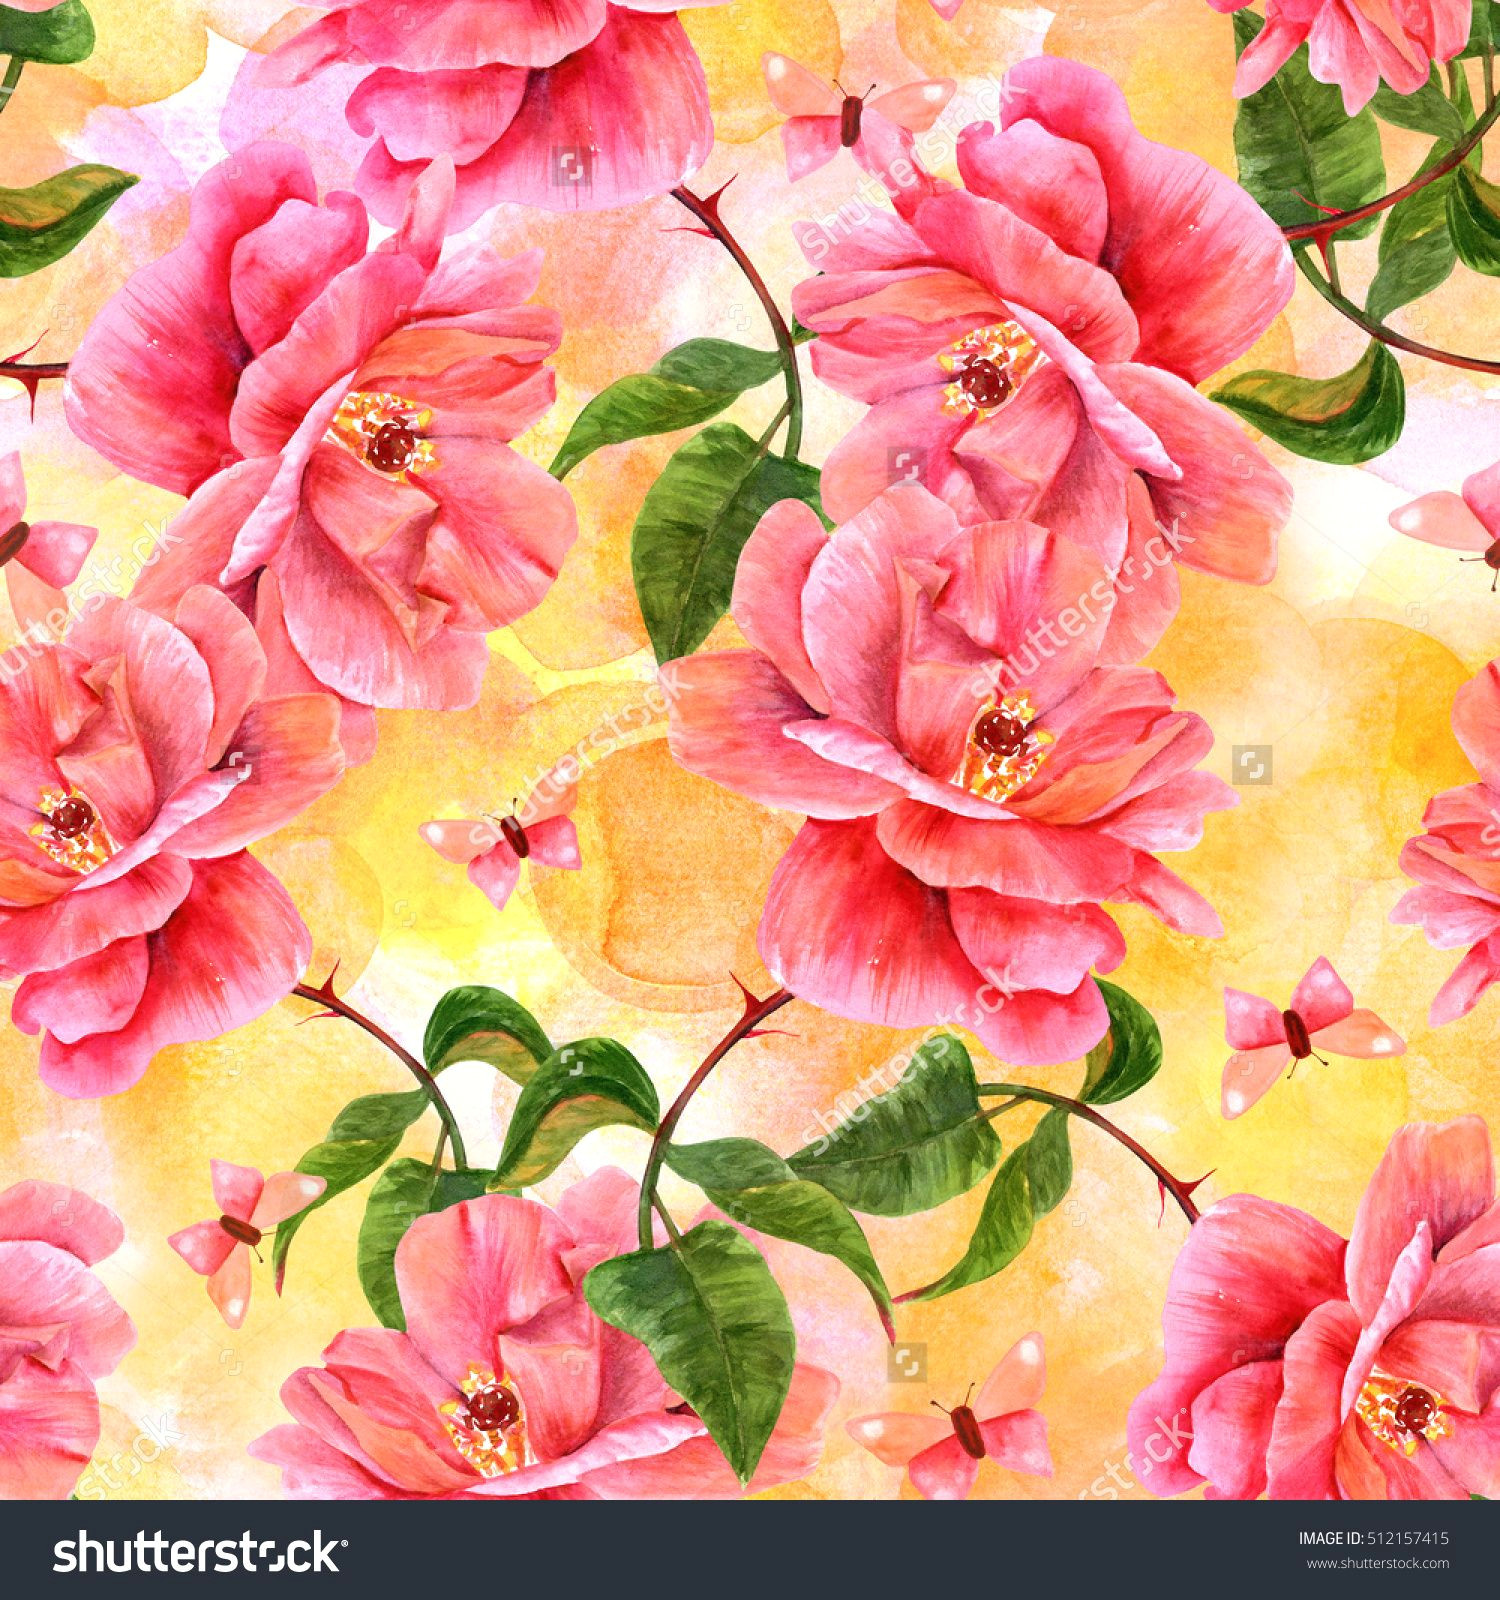 Drawings Of Pink Flowers Watercolor Of Pink Roses and butterflies Florals Foliage